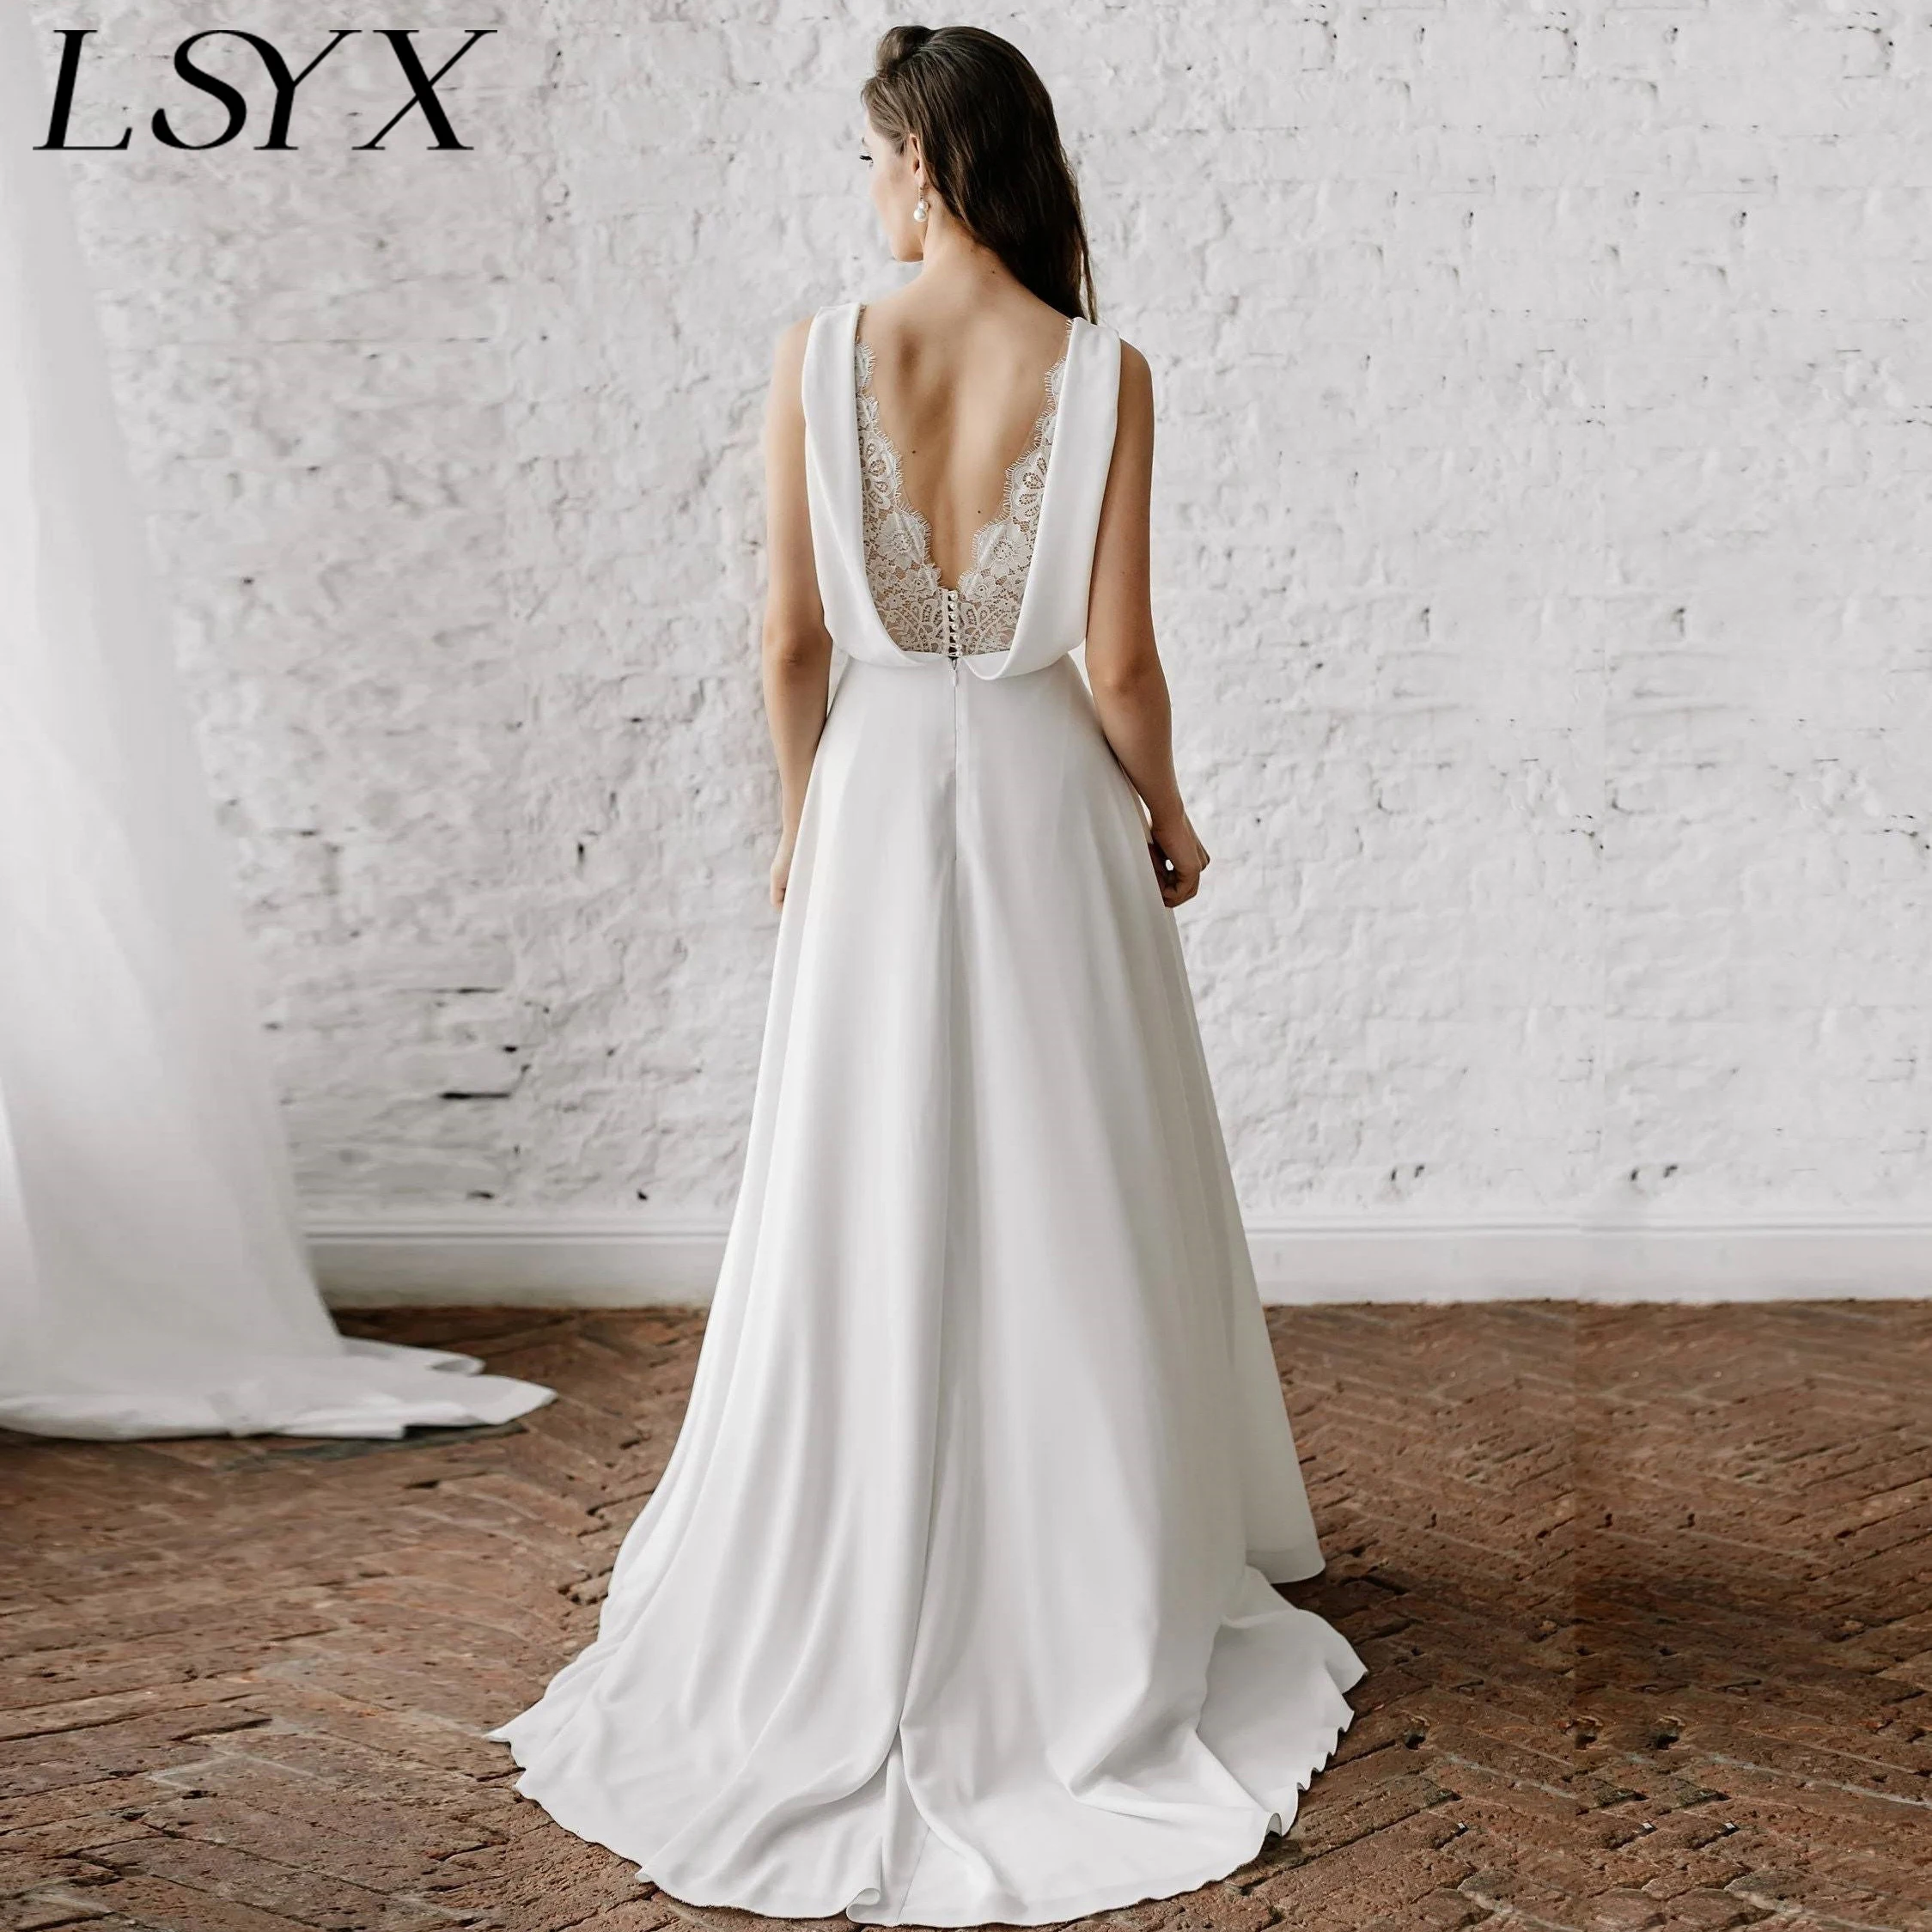 

LSYX Backless V Neck Lace Boho Wedding Dress A Line Elegant Ruched Sleeveless Simple Bridal Gown Custom Made